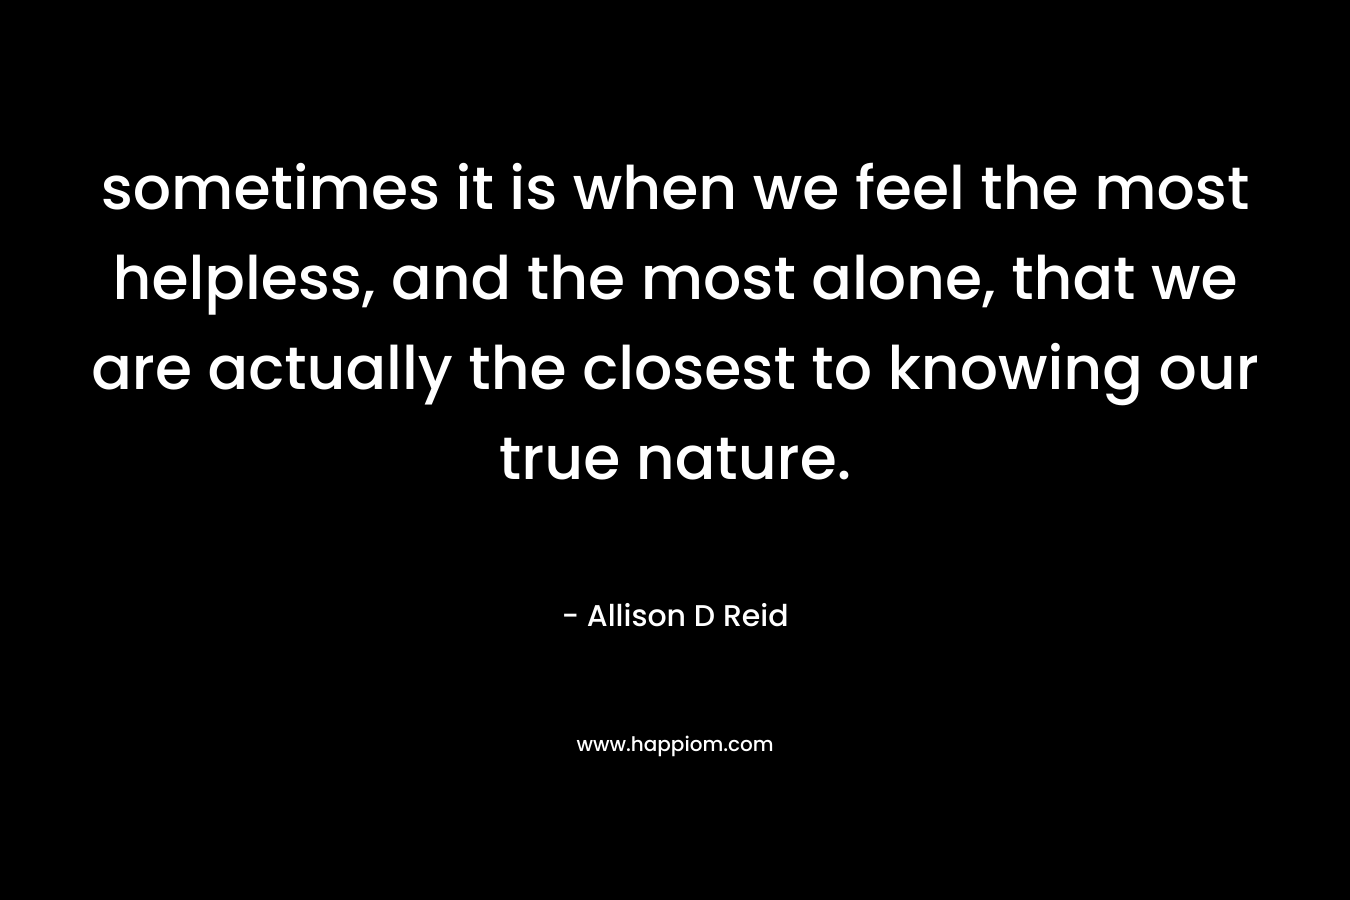 sometimes it is when we feel the most helpless, and the most alone, that we are actually the closest to knowing our true nature.